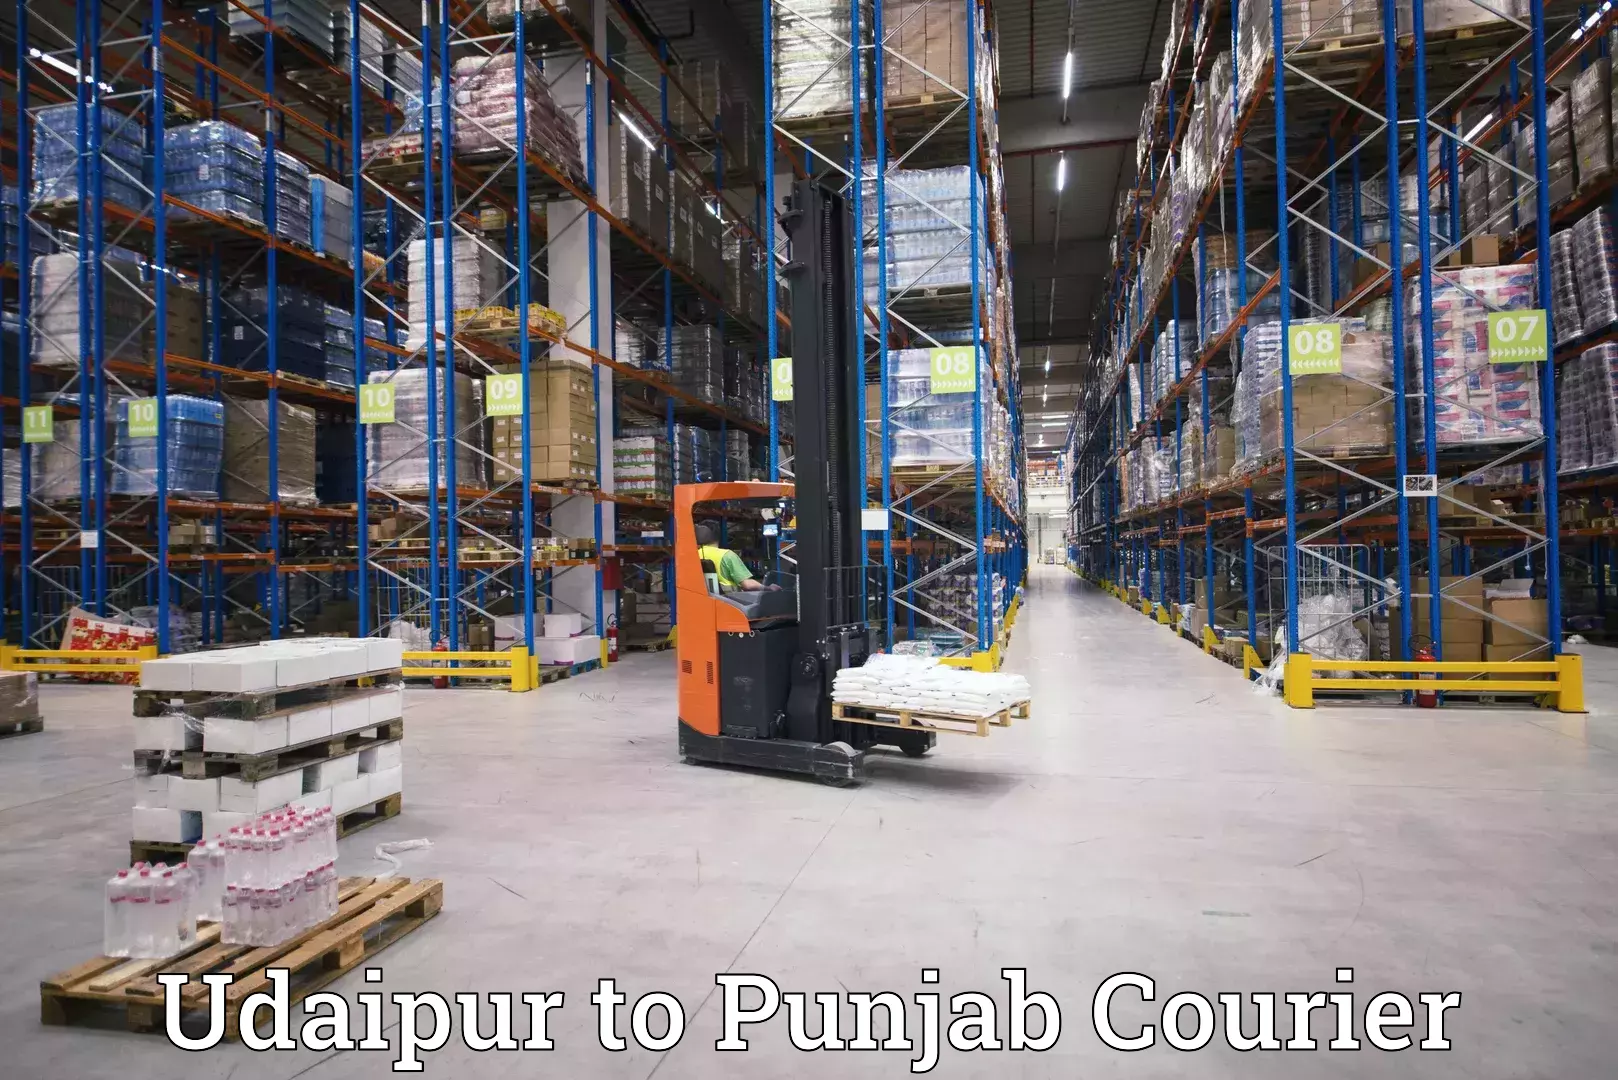 Global shipping networks Udaipur to Punjab